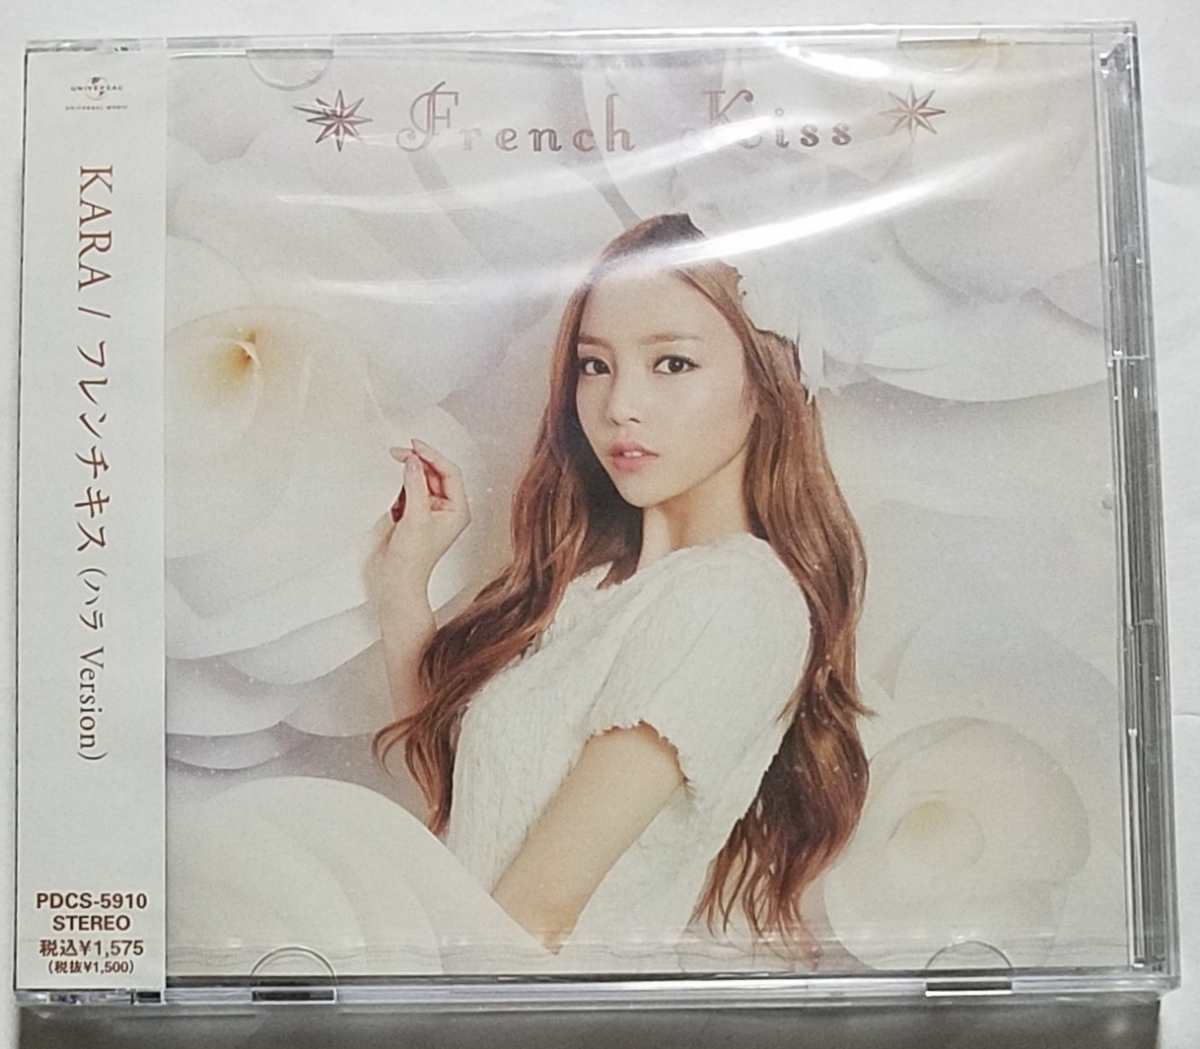 KARAk* is la French Kiss universal store limitation record new goods unopened CD+DVD not yet reproduction Goo Hara ver. Japanese record French Kiss Solo Schott PV